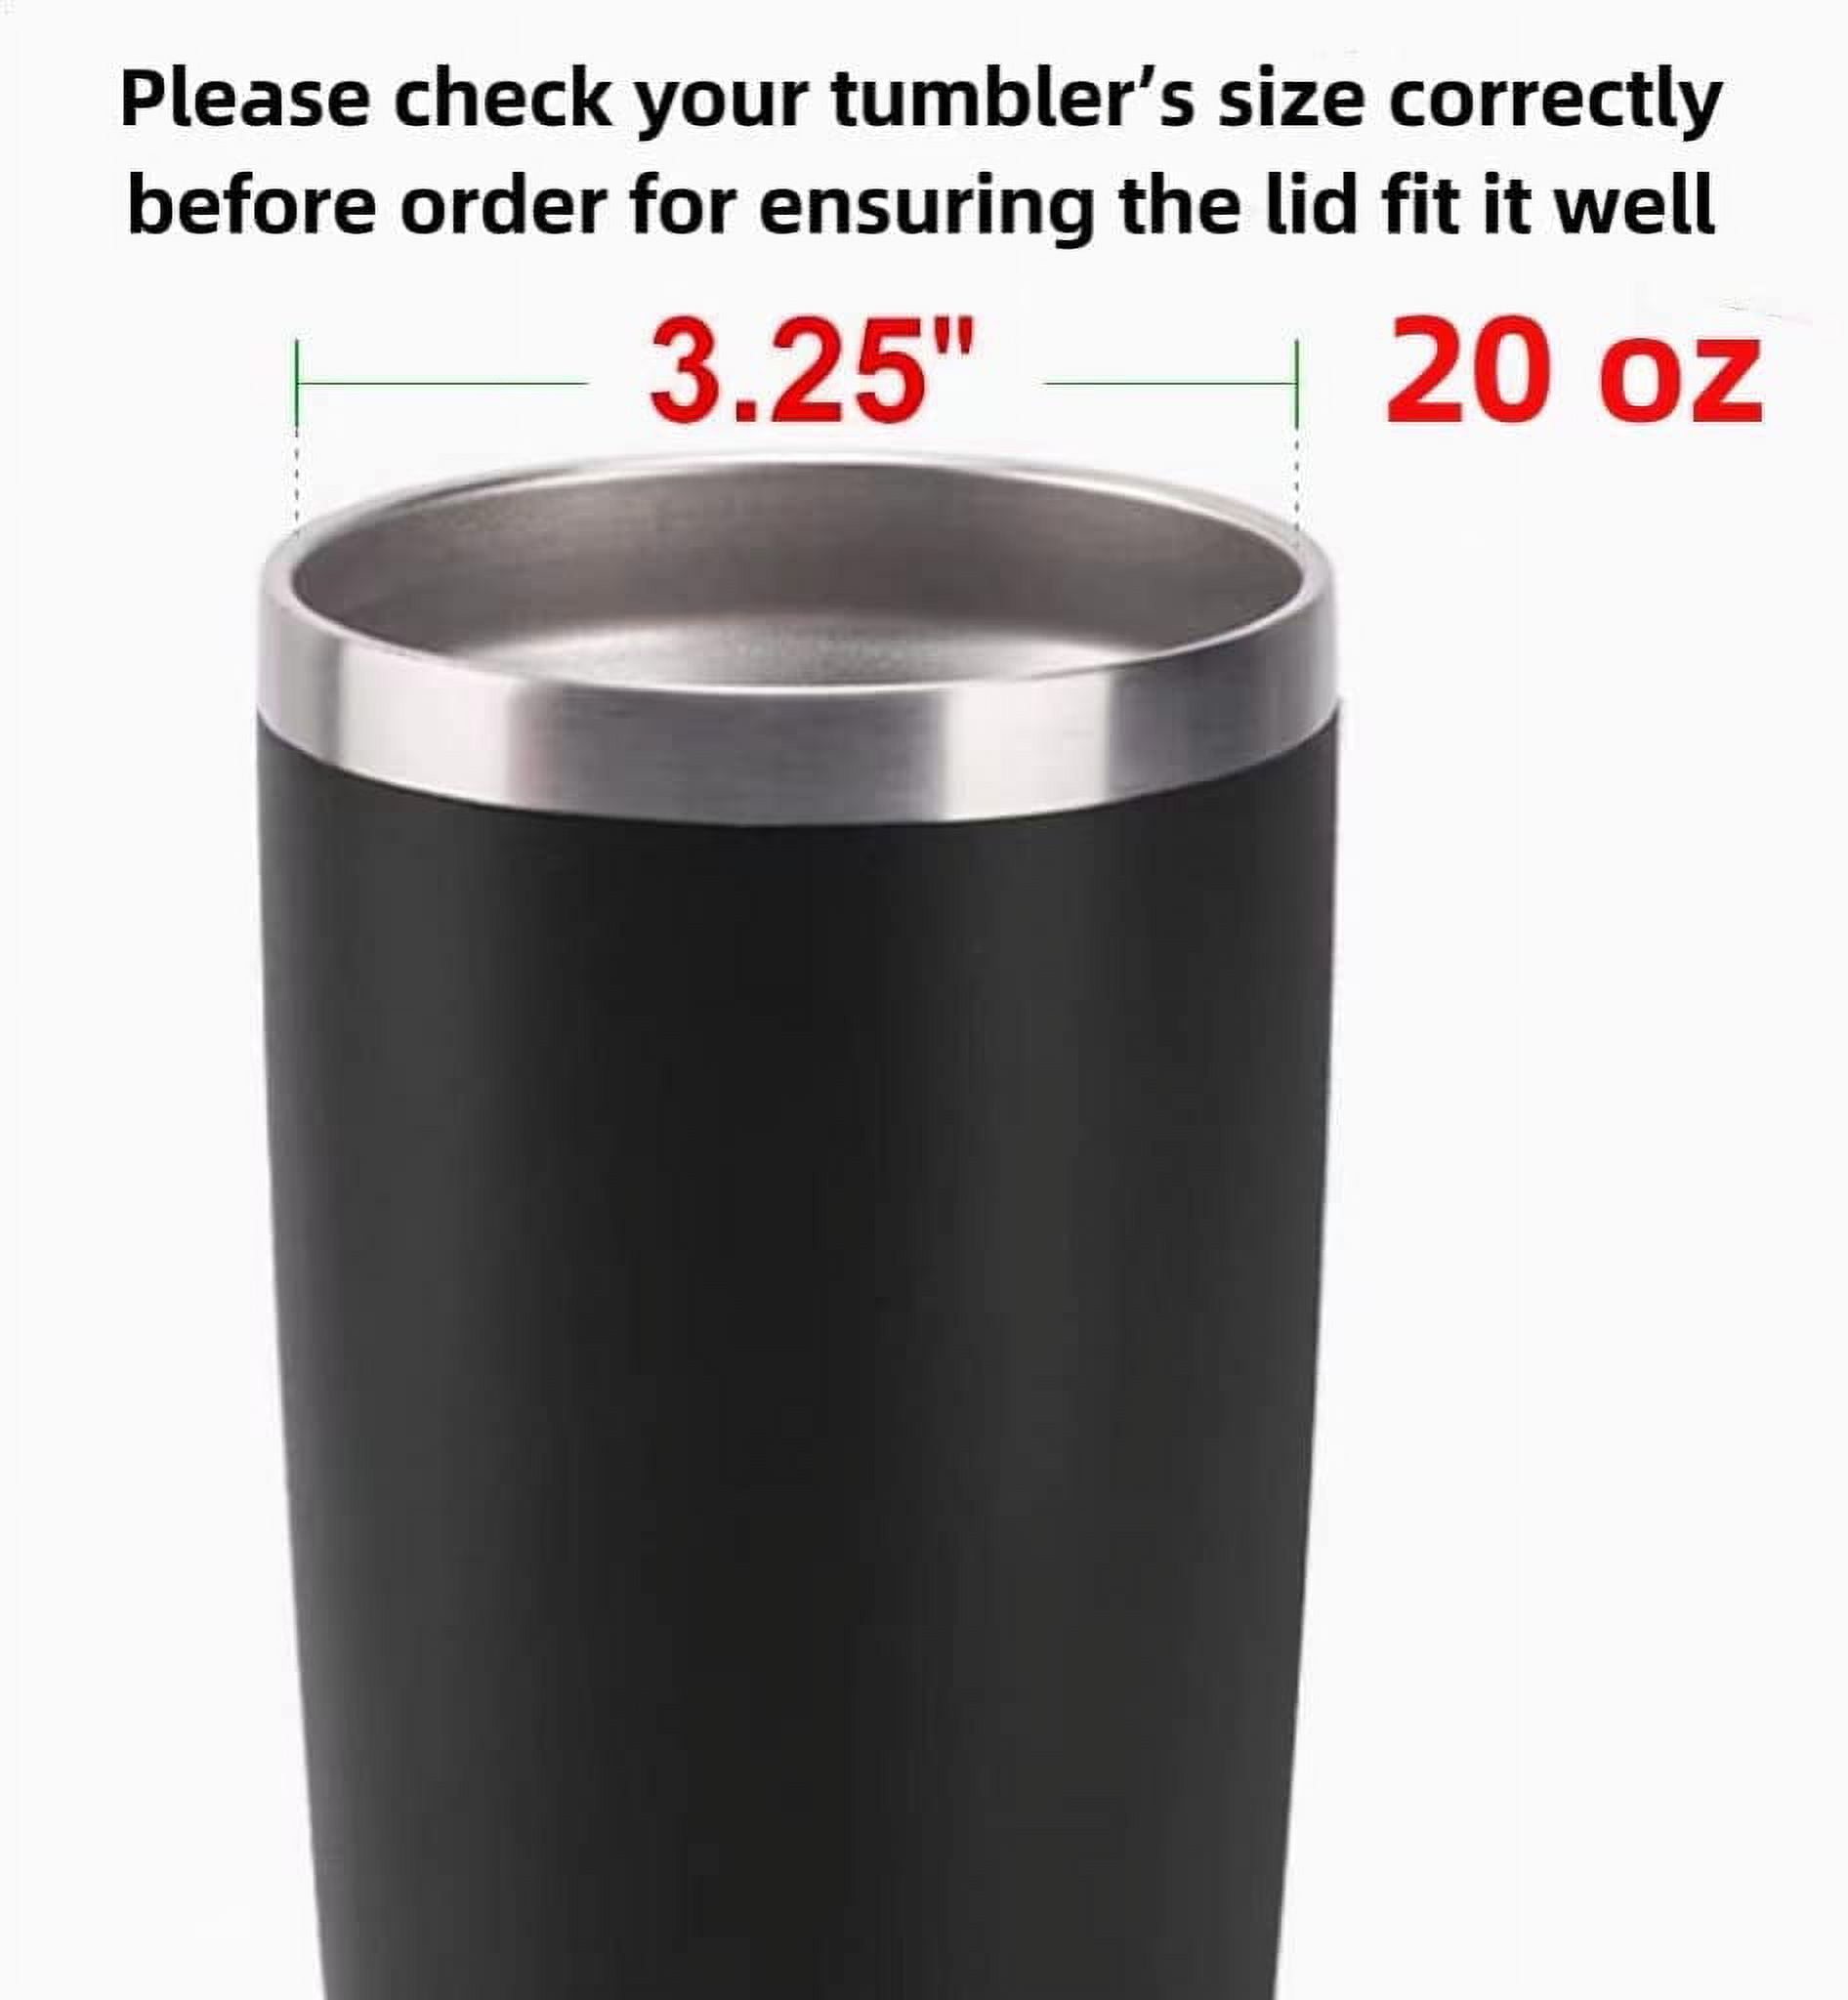 20 Oz Replacement Tumbler Lid, Only Fits Whatagreatgift Tumblers 